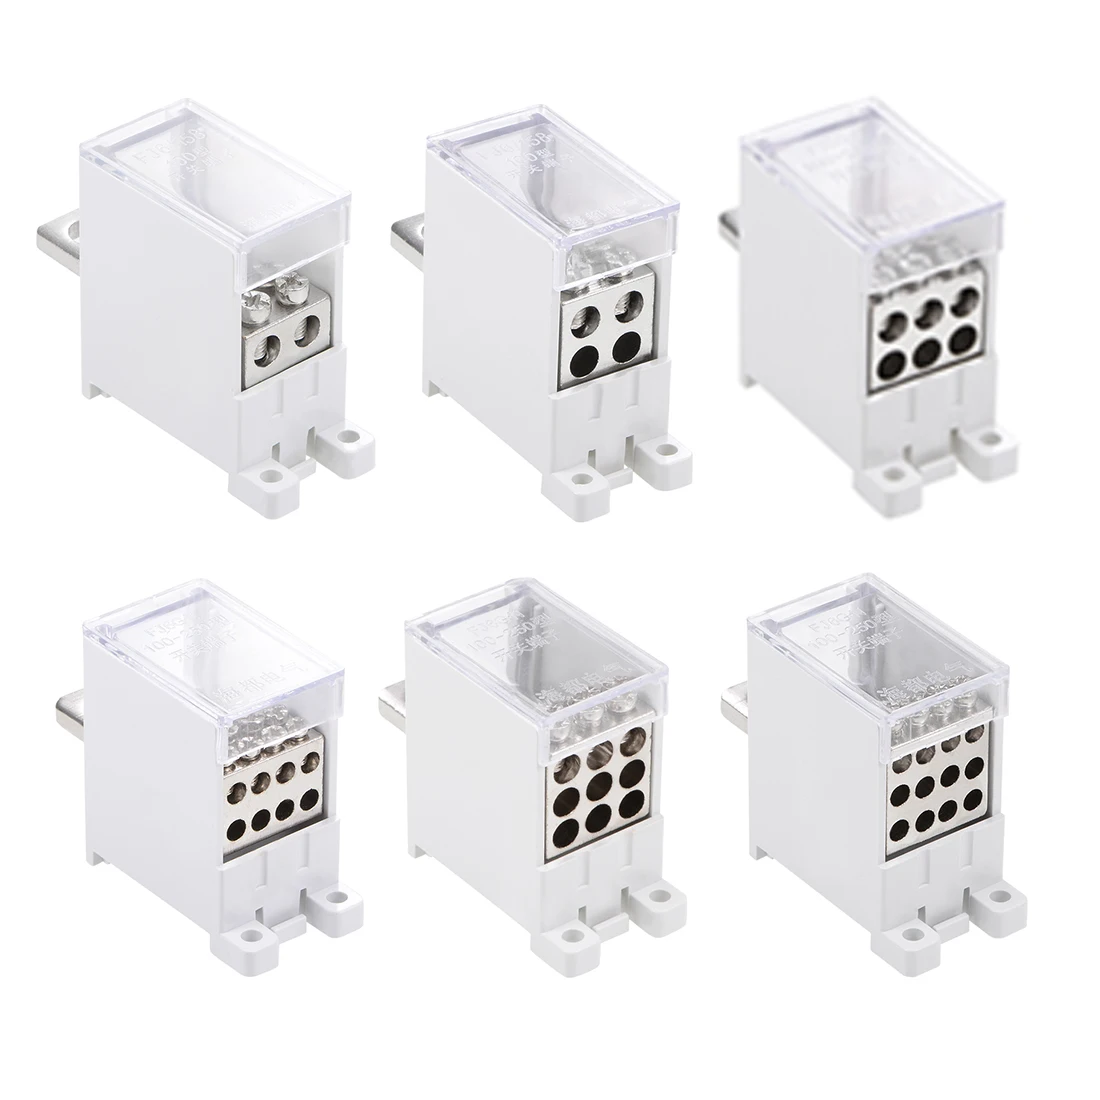 Uxcell 1 Inlet 2/4/6/8/9/12 Outlet DIN Rail Terminal Blocks 125A Max Input Distribution Block for Circuit Breaker Gate Motor